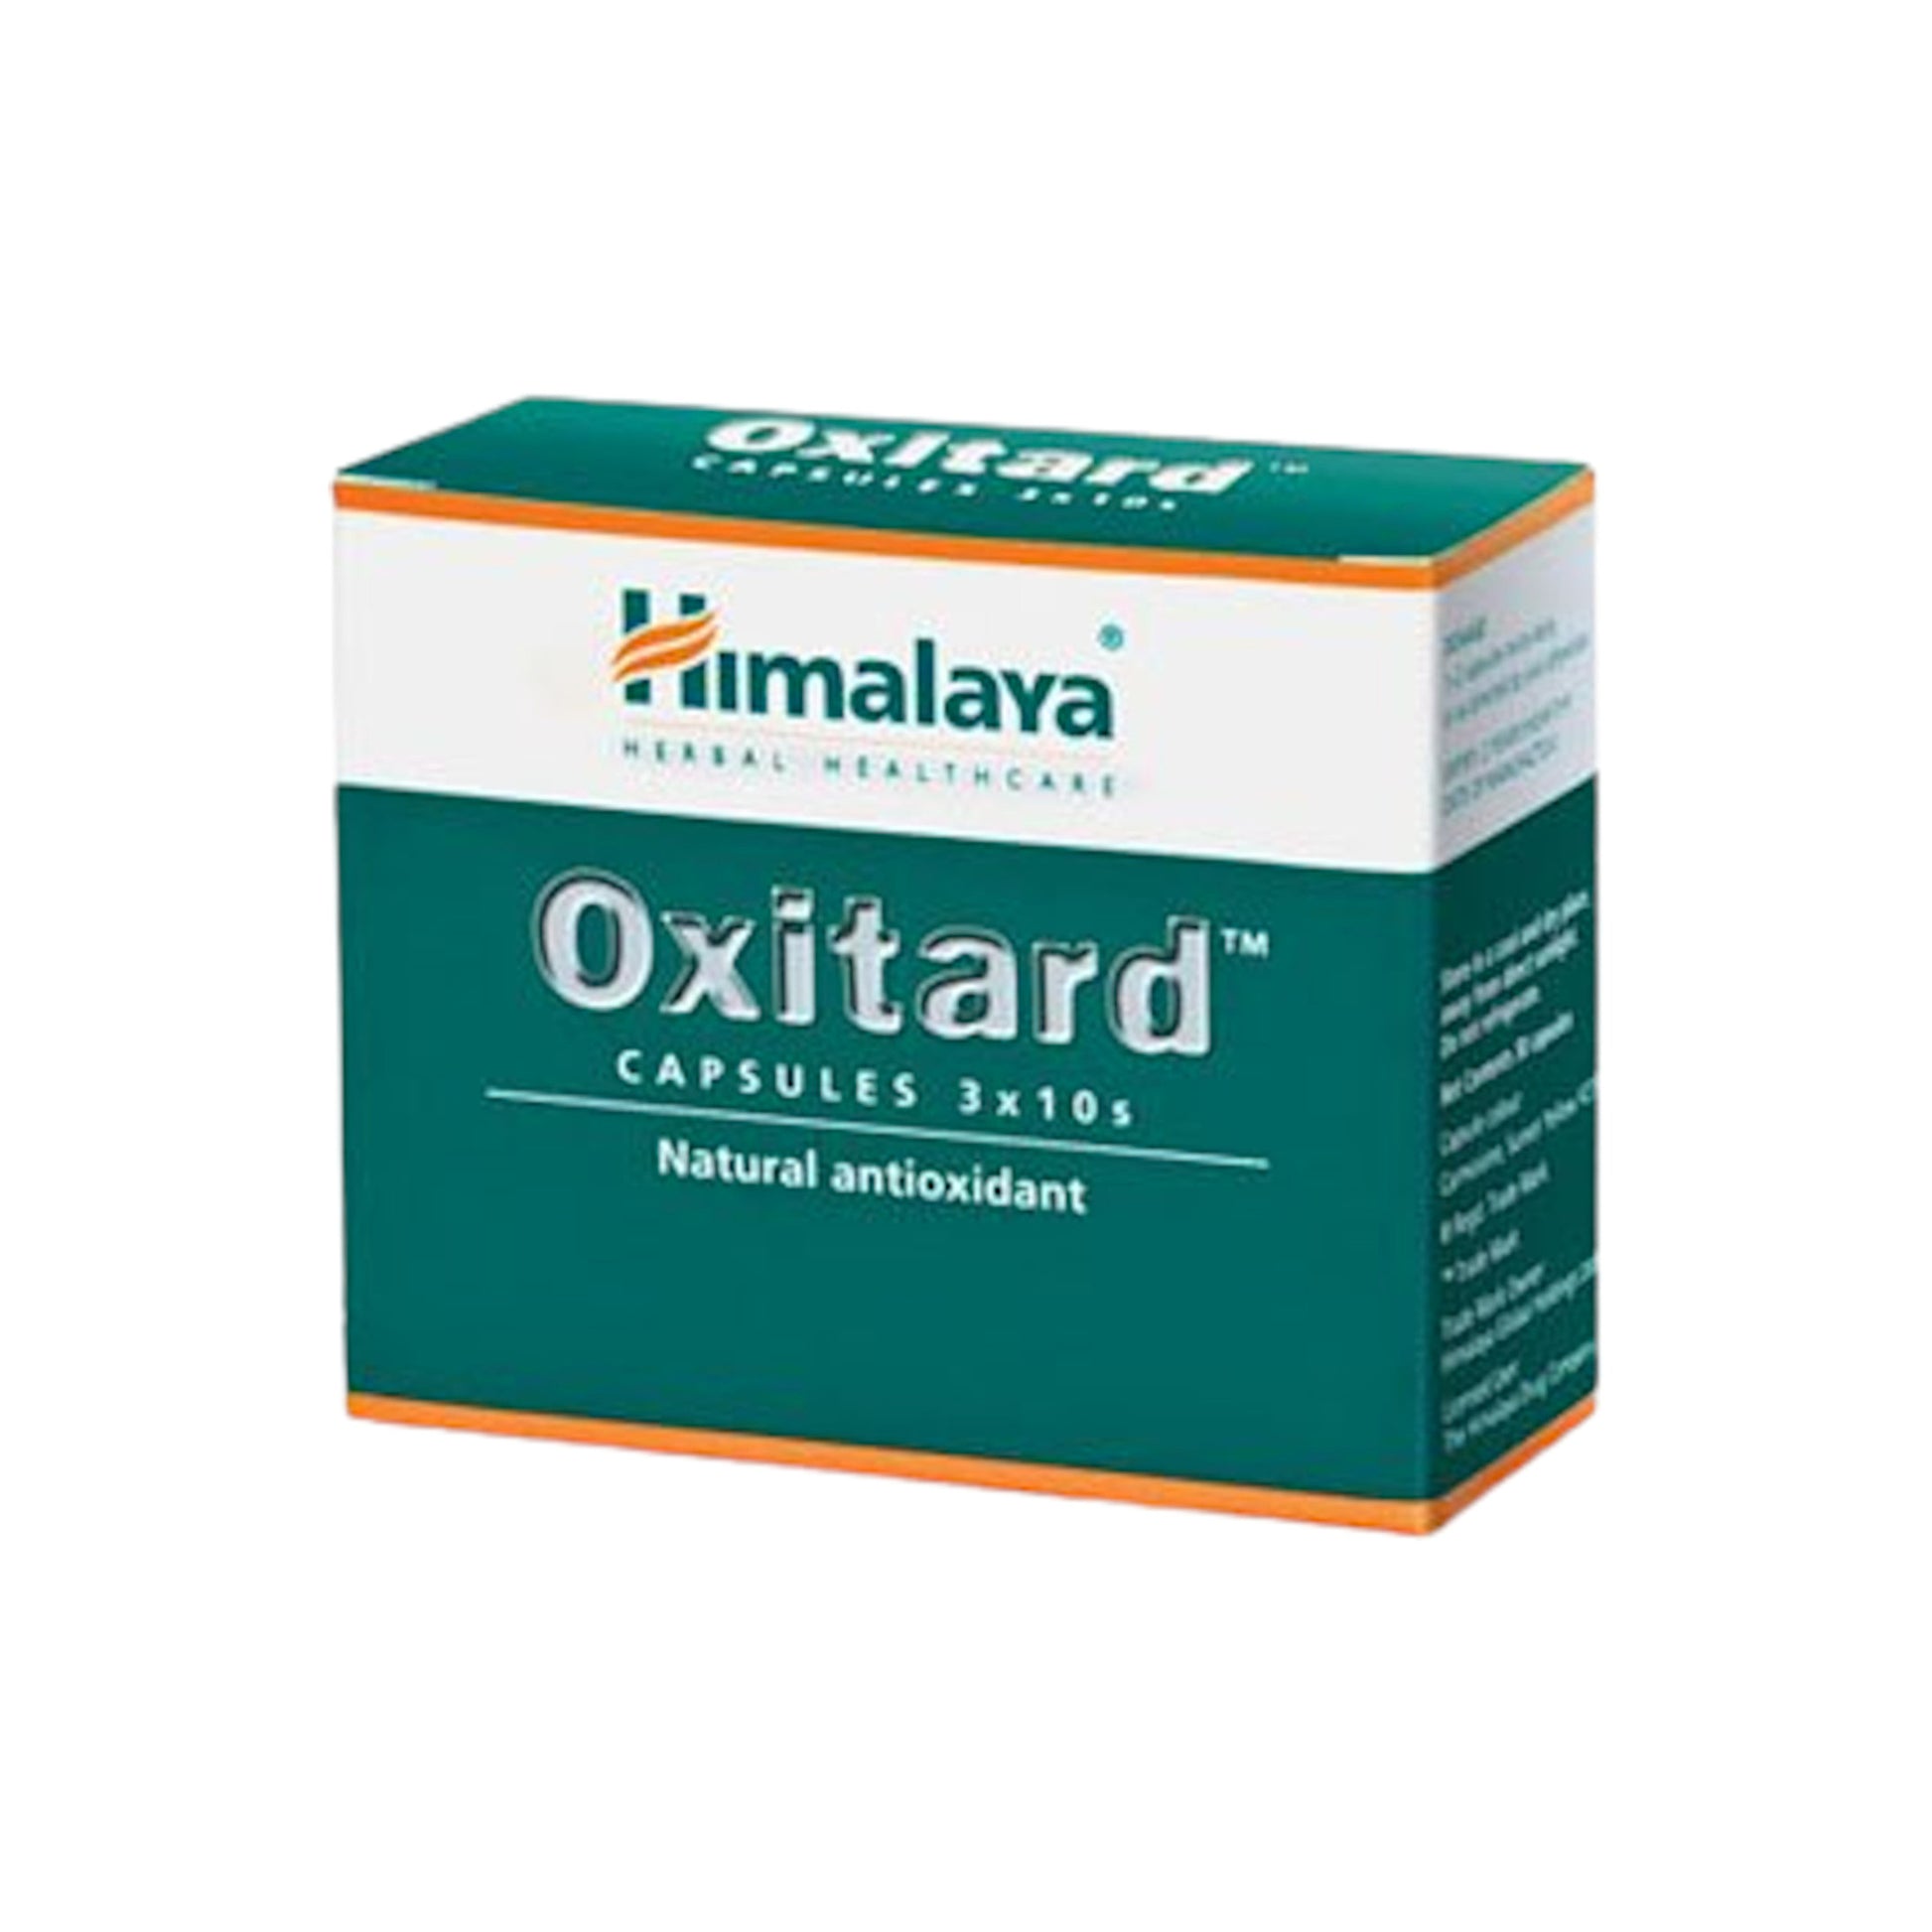 Image: Himalaya Herbals Oxitard 30 Capsules: Antioxidant capsules for overall wellness and cellular health.